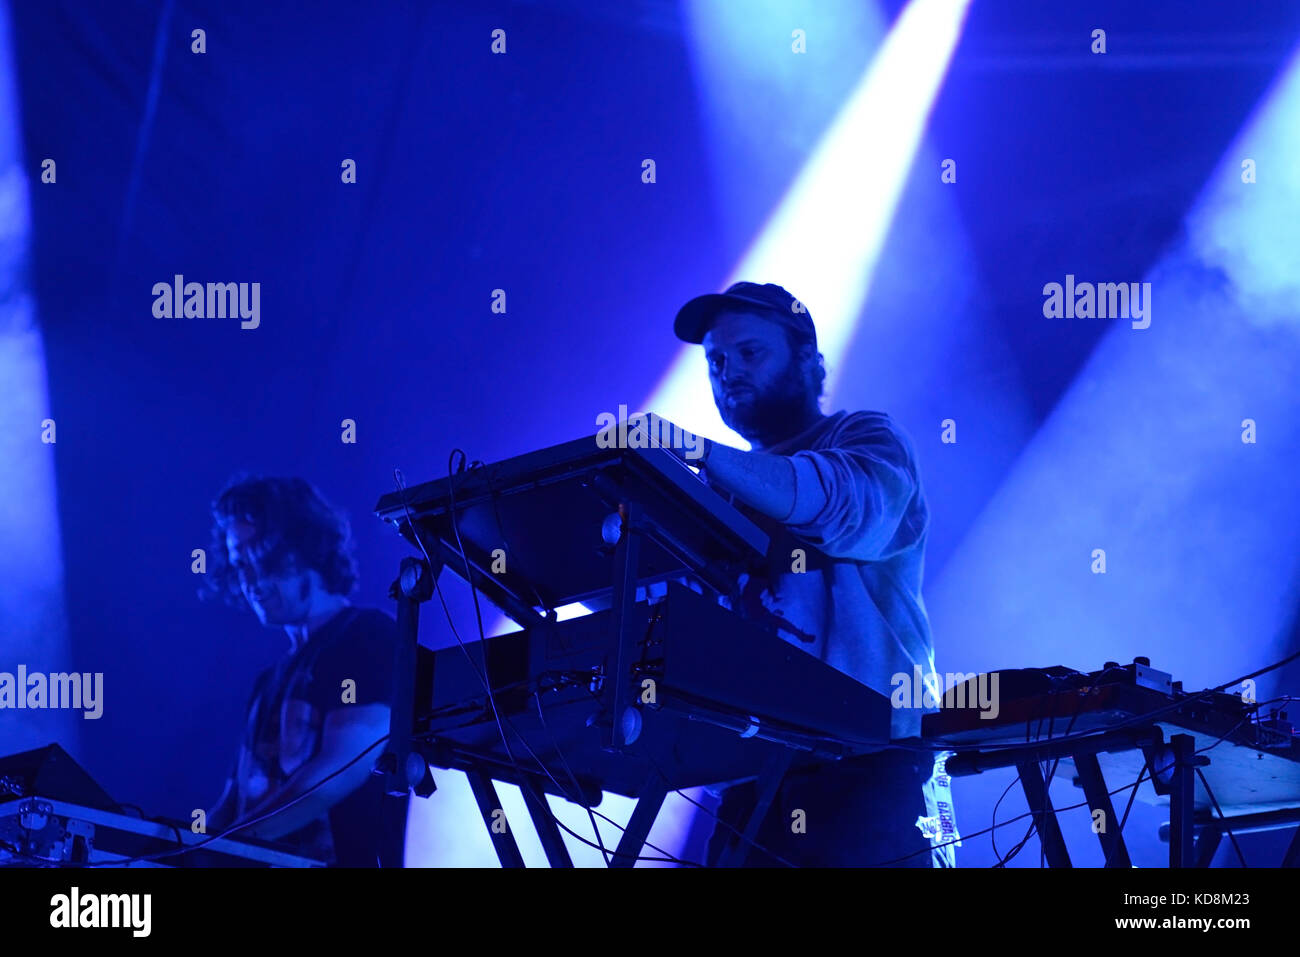 BARCELONA - JUN 1: Survive (electronic music band) perform in concert at Primavera Sound 2017 Festival on June 1, 2017 in Barcelona, Spain. Stock Photo